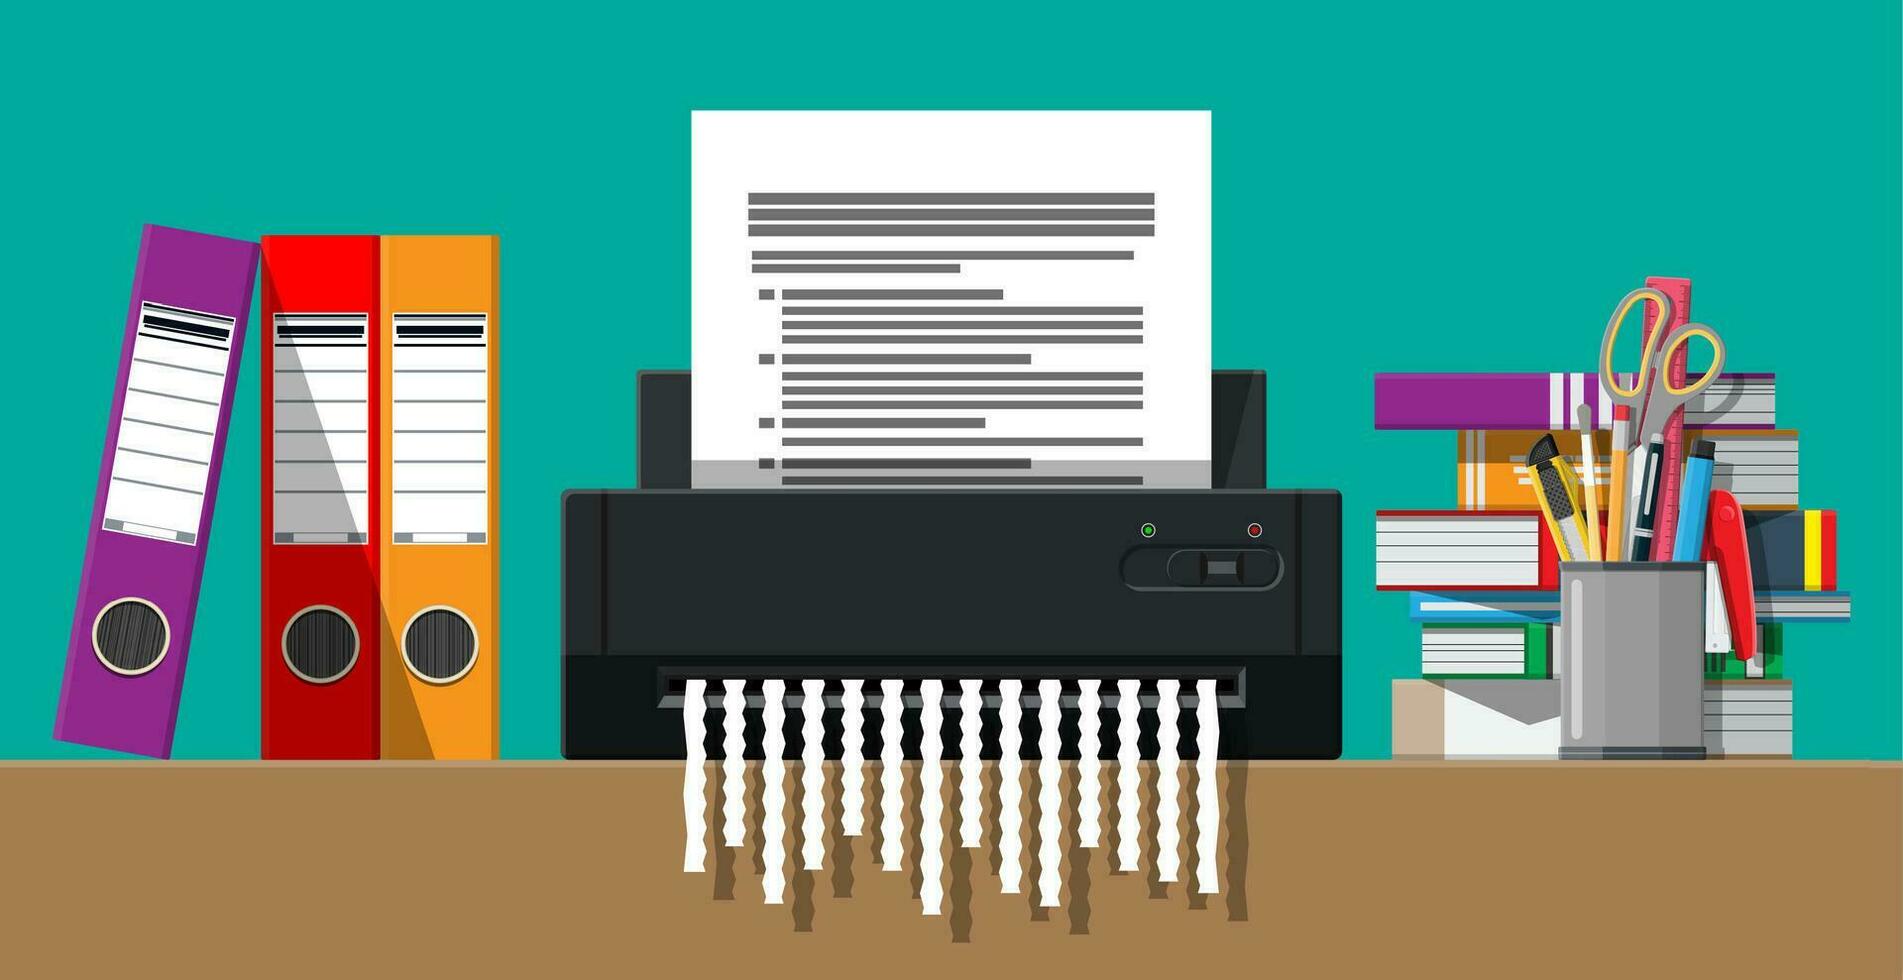 Paper document in shredder machine. Torn to shreds document. Contract termination concept. Table with books, stationery, ring binder. Vector illustration in flat design